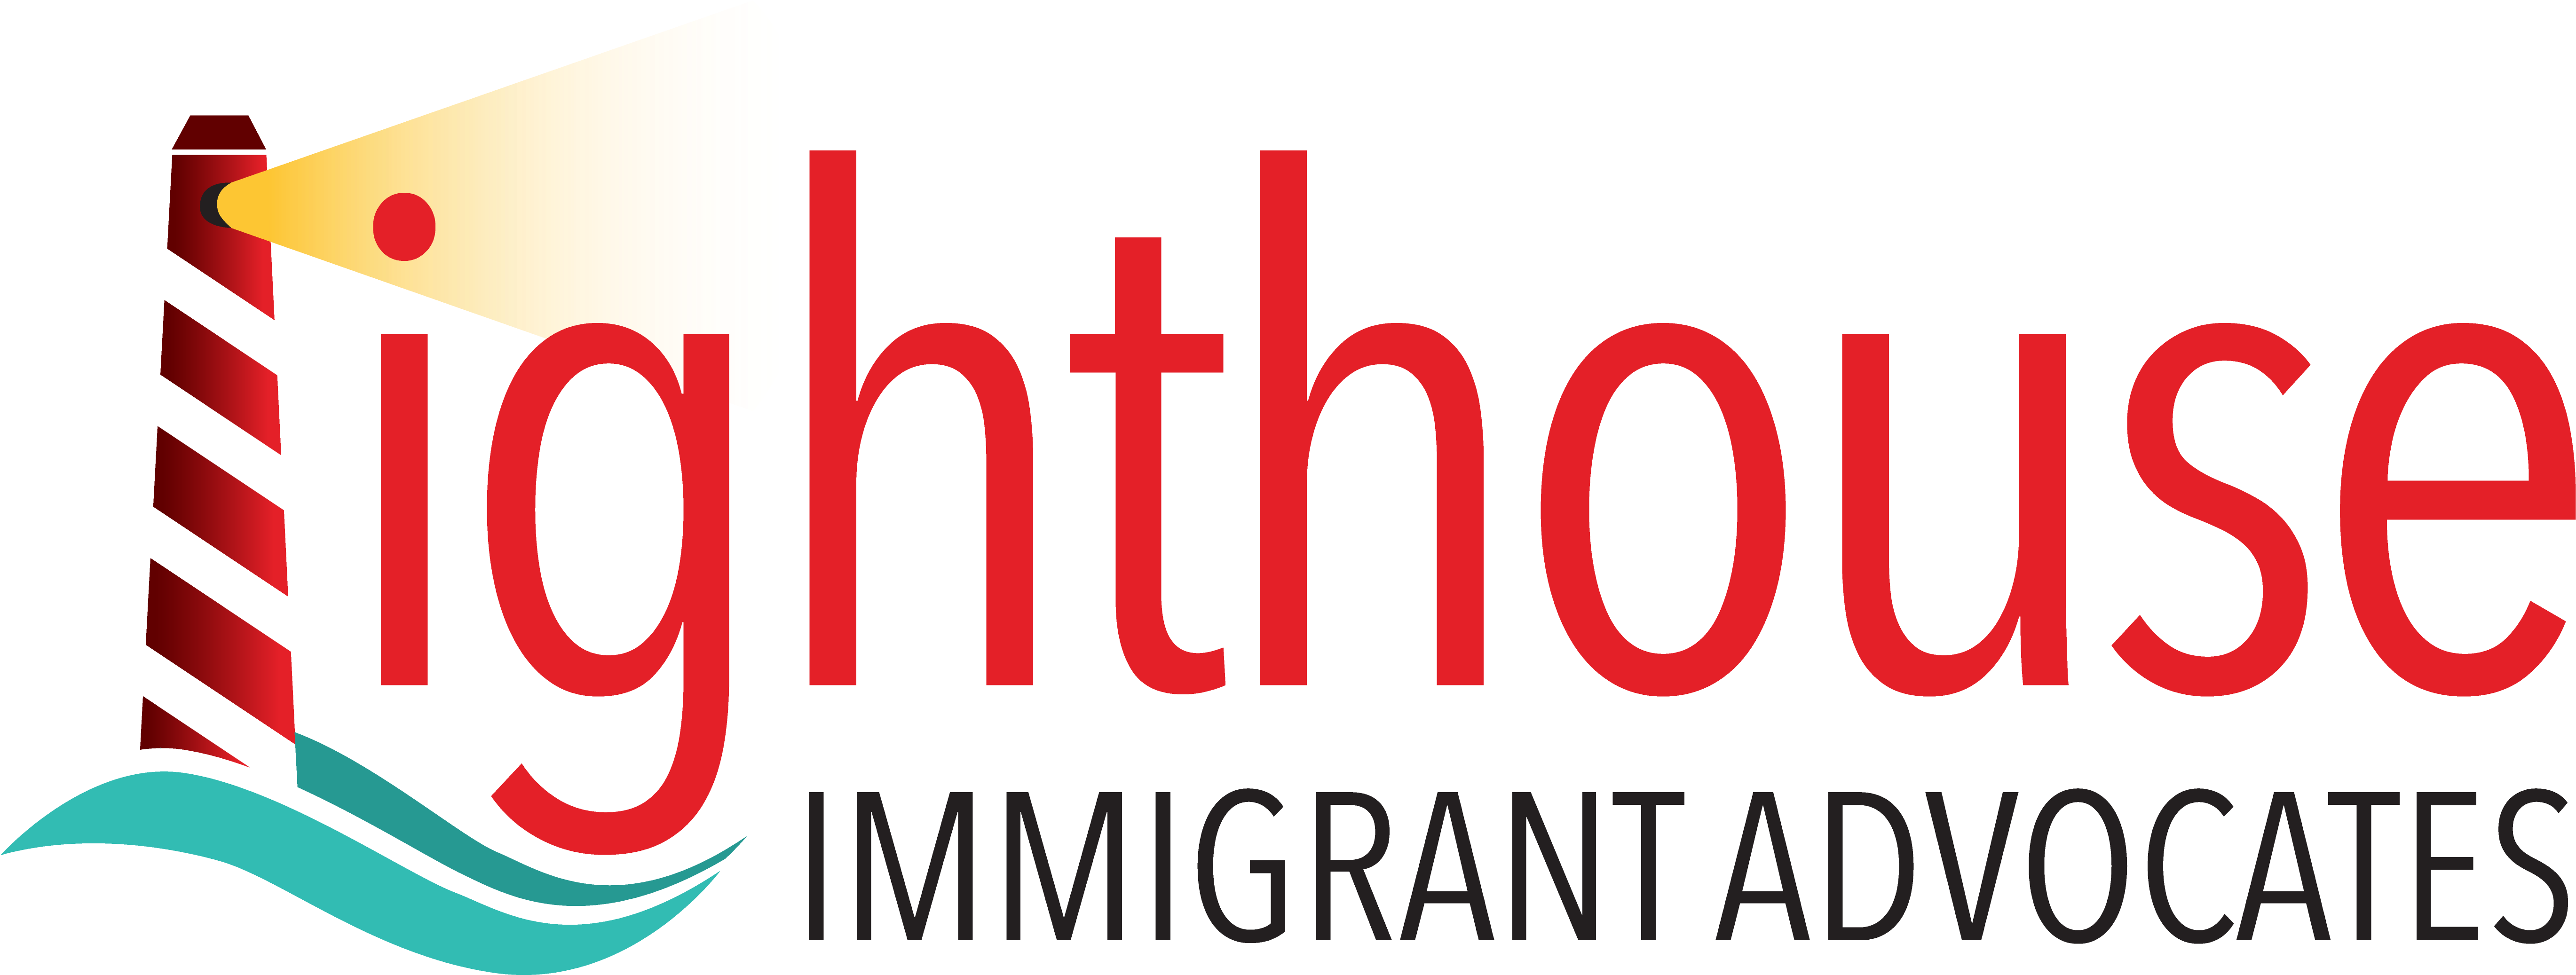 Lighthouse Immigrant Advocates - Graphic Design (5704x2567), Png Download